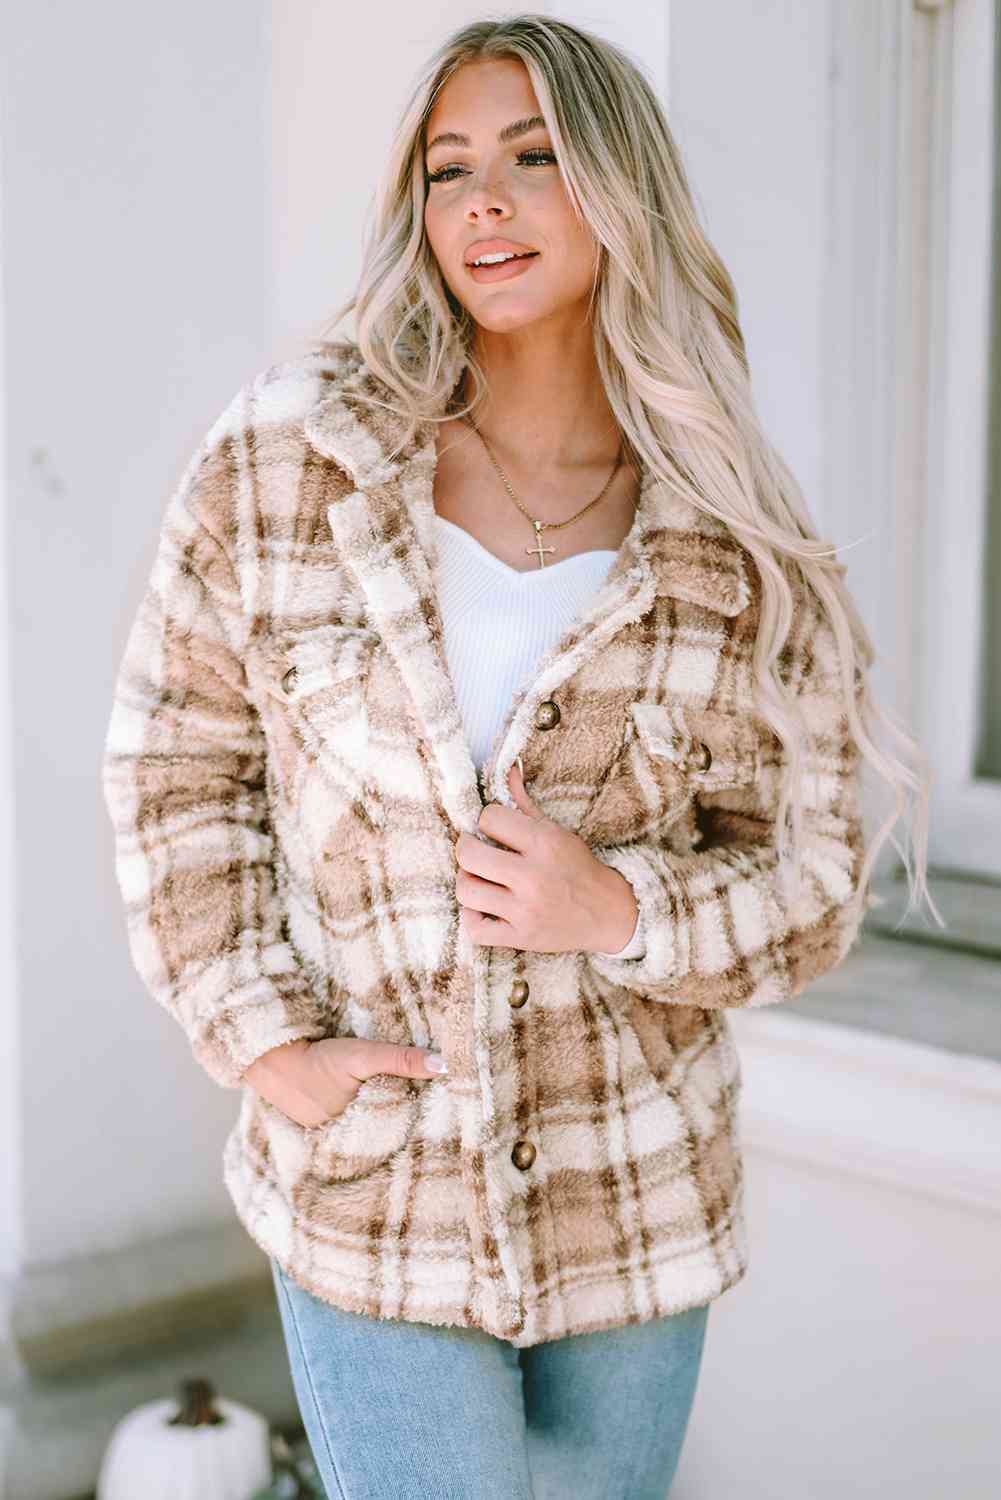 Plaid Collared Neck Jacket - The Teal Antler Boutique